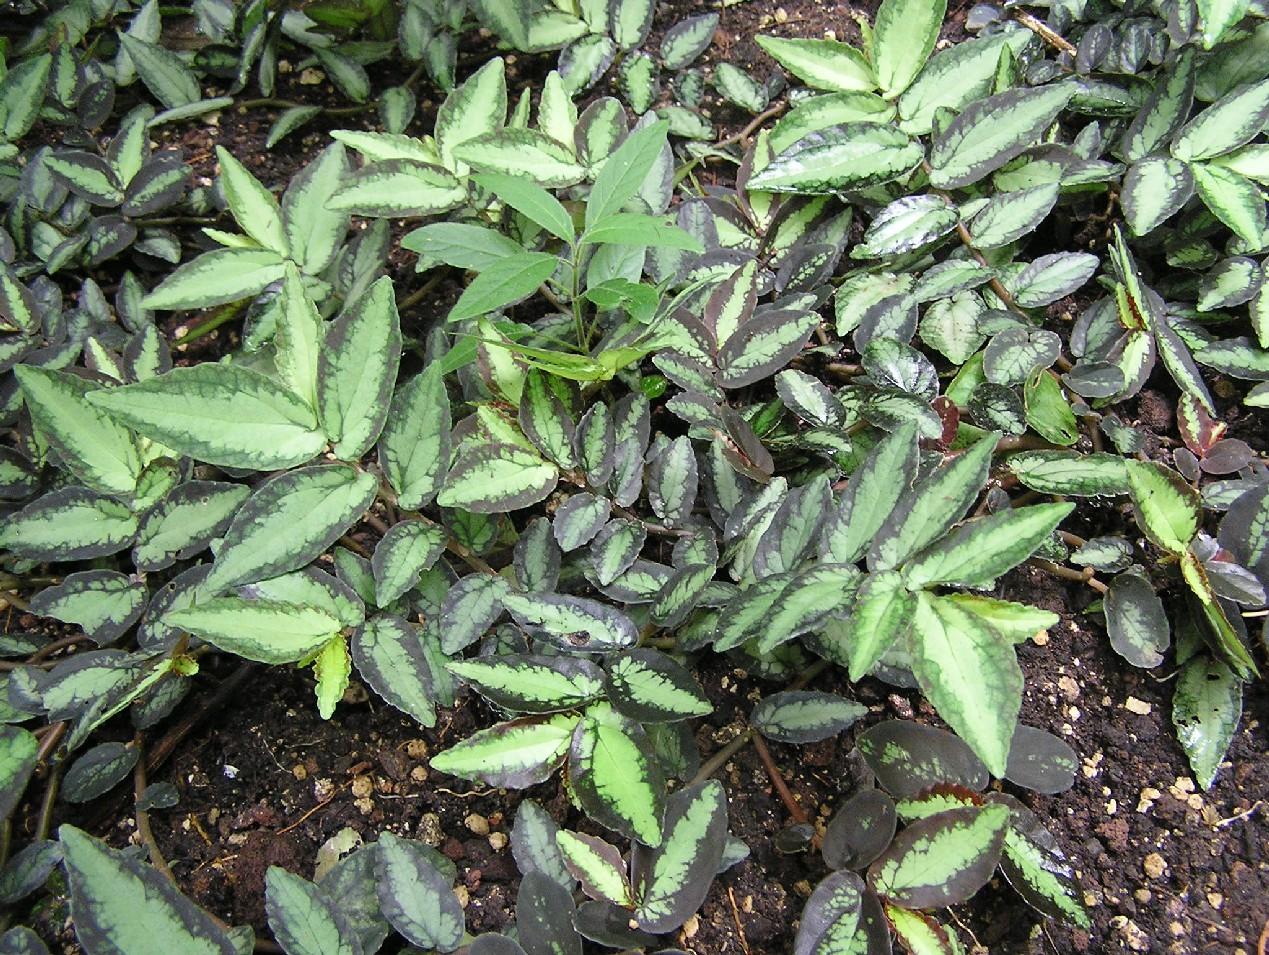 Black-green leaves with brown stems.